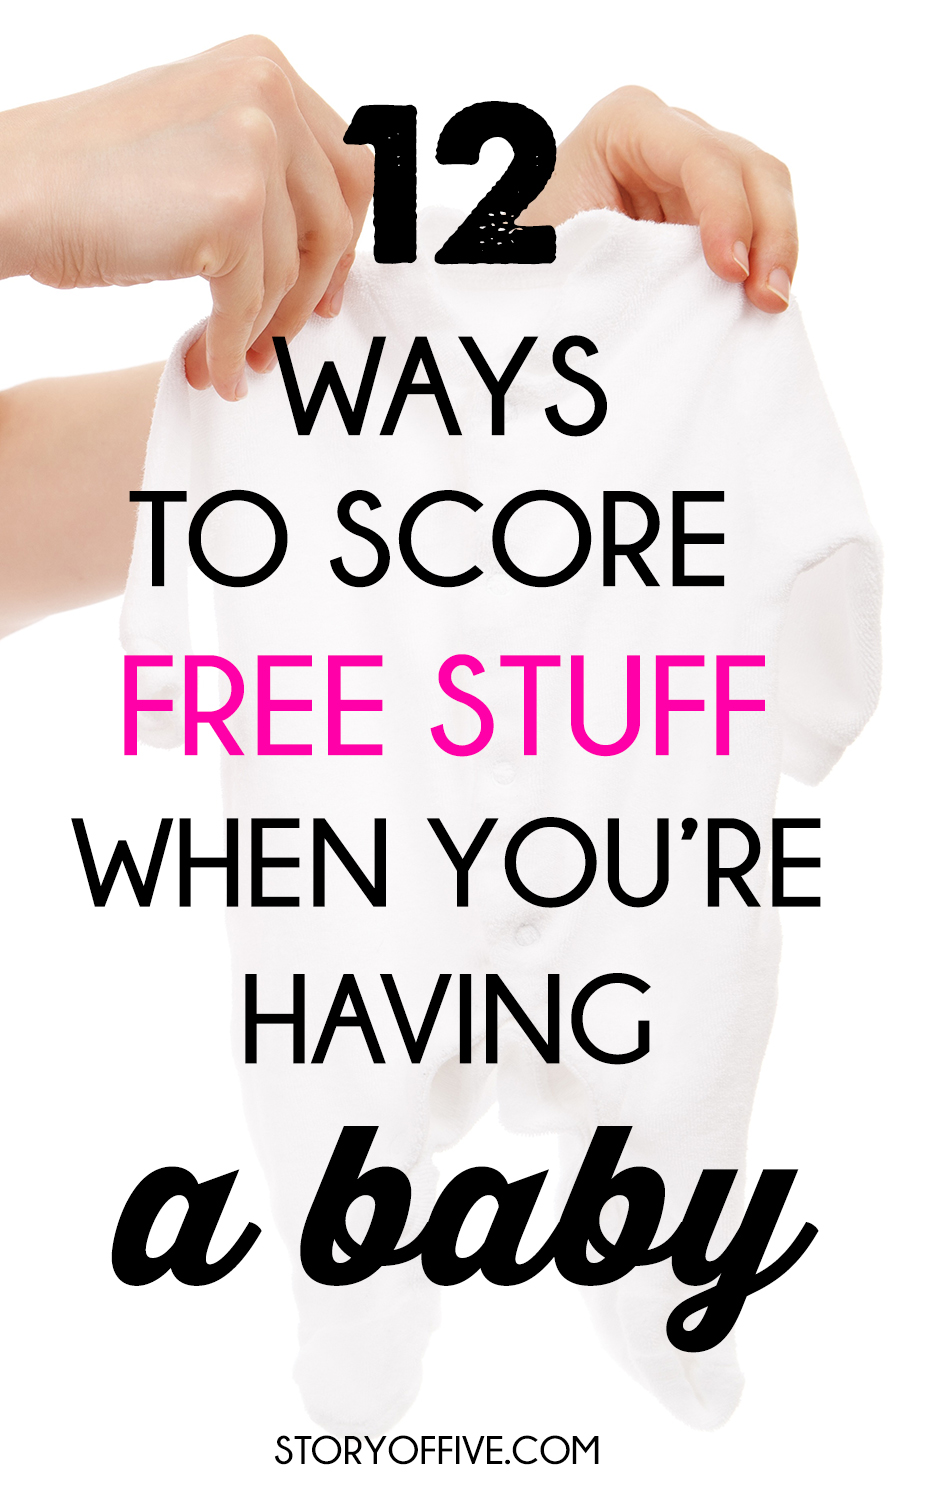 how to get free baby stuff when you're having a baby